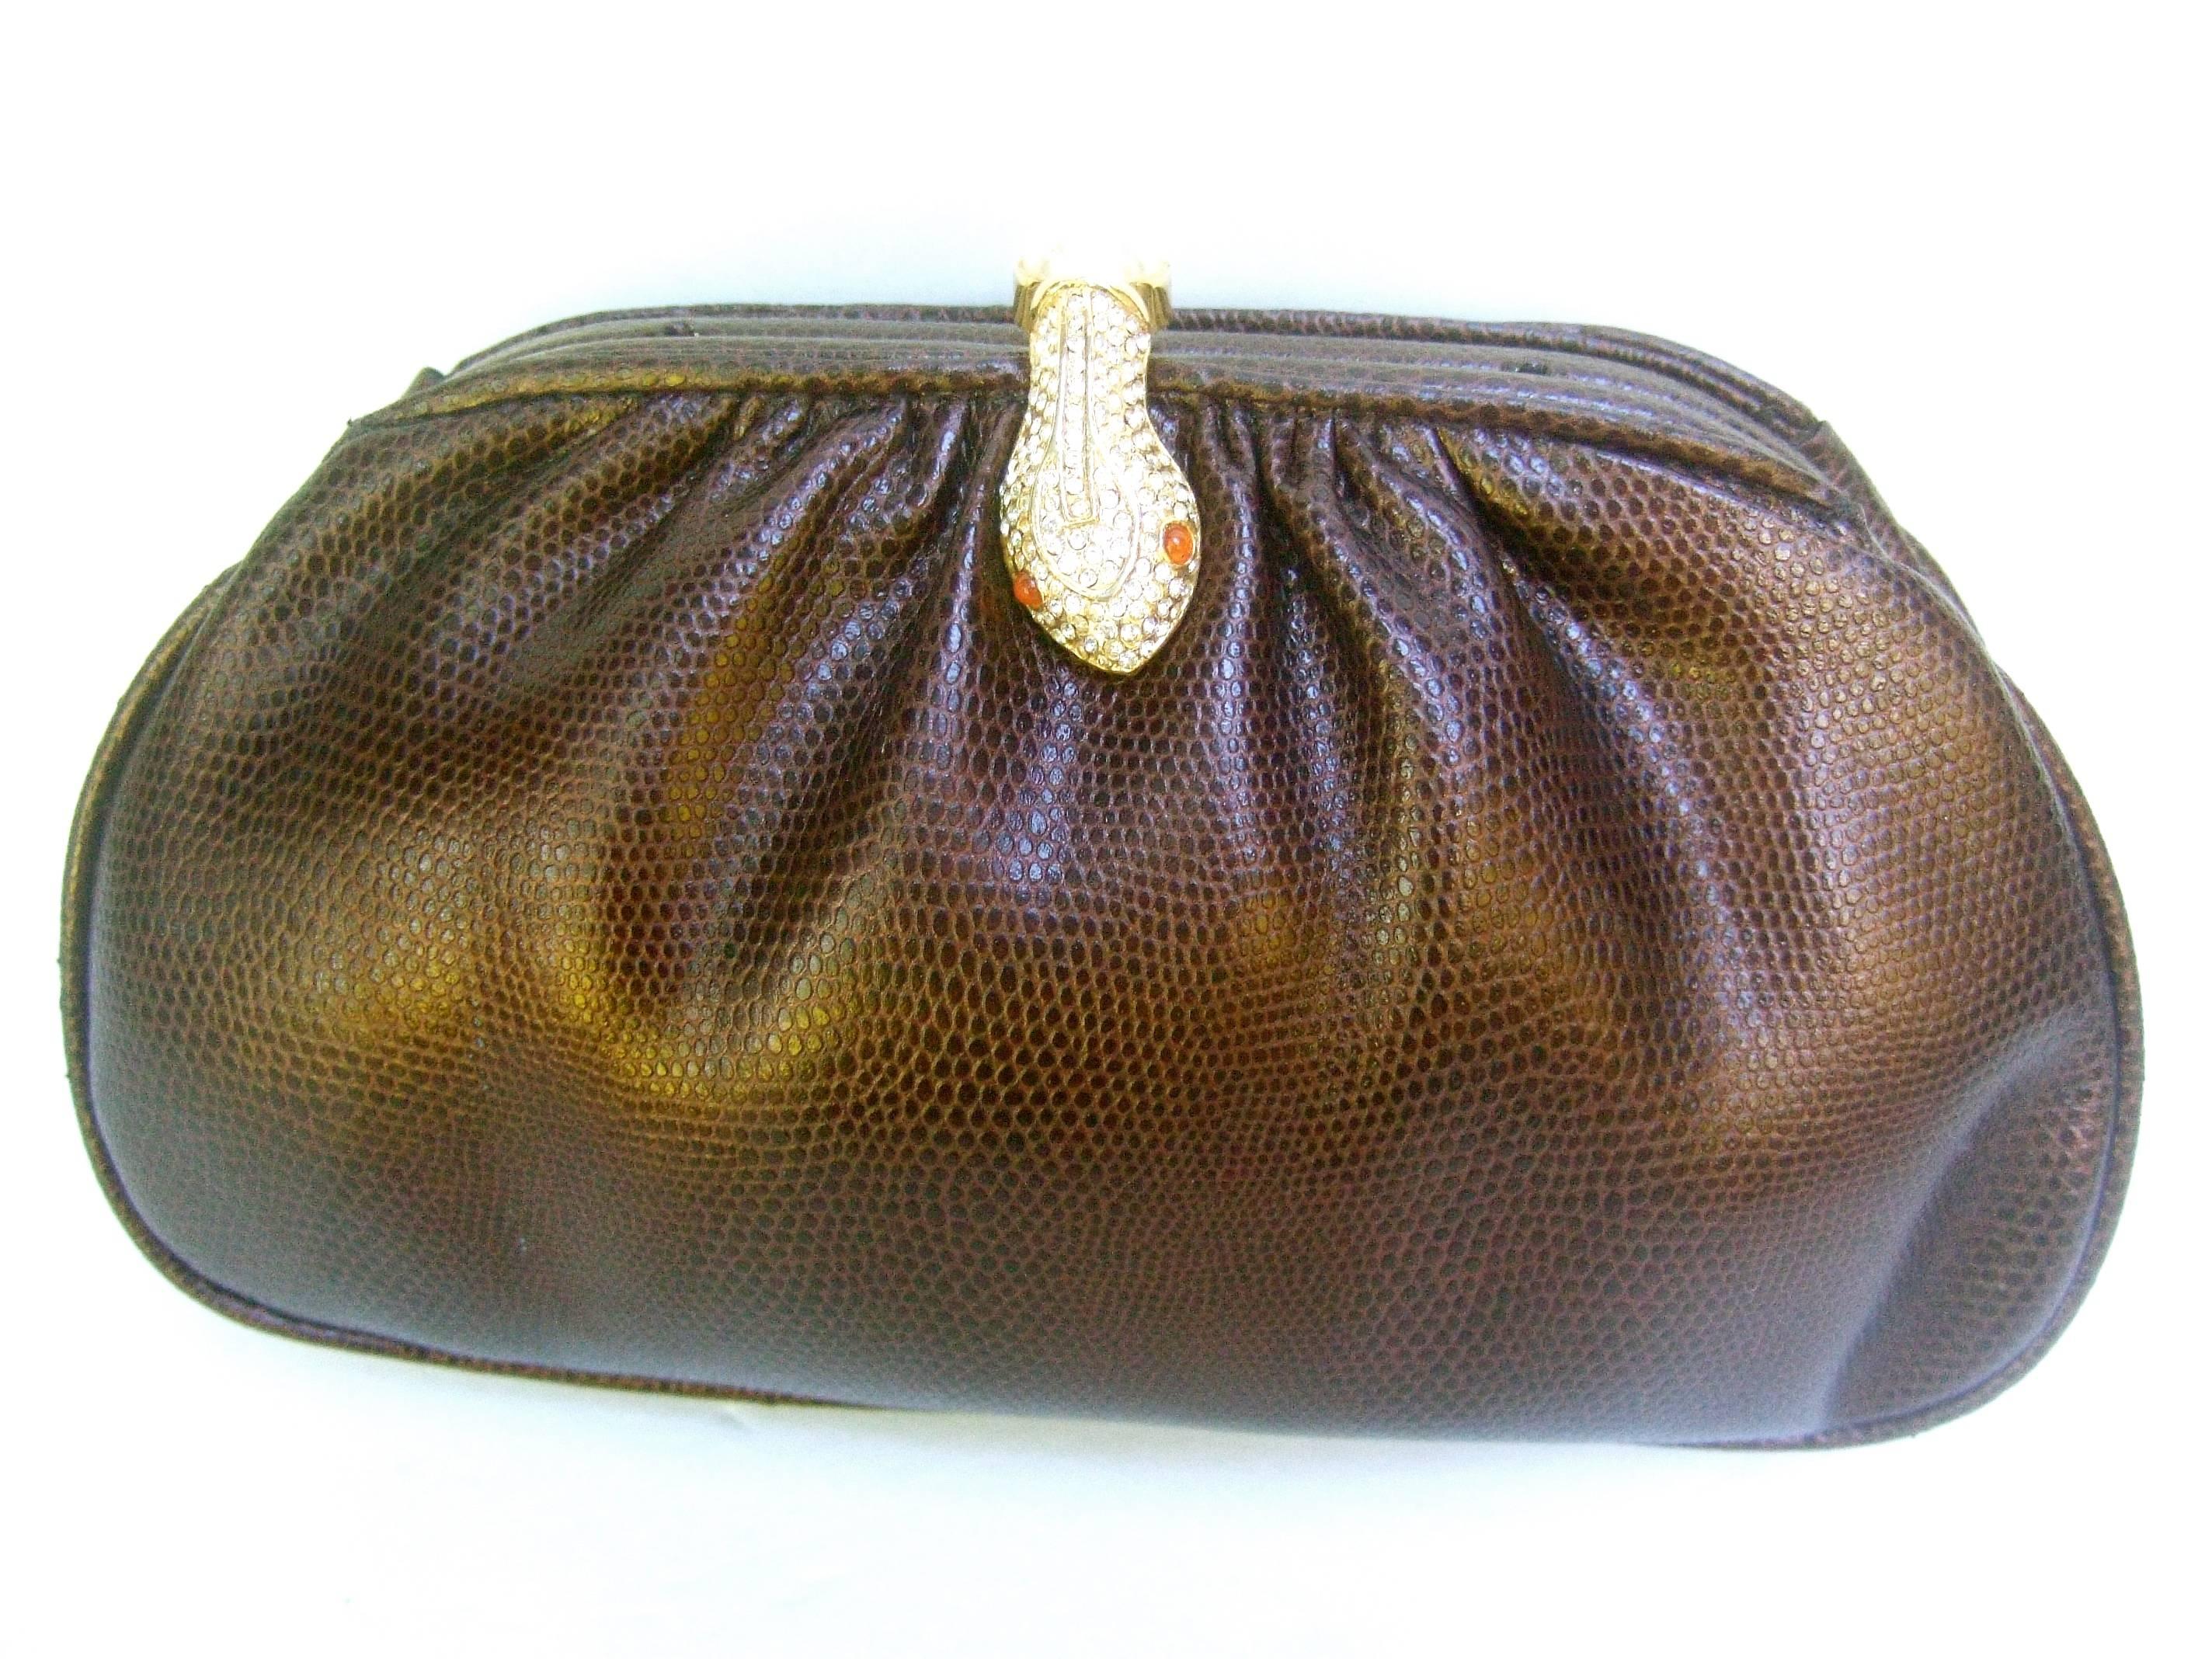 jeweled evening bags